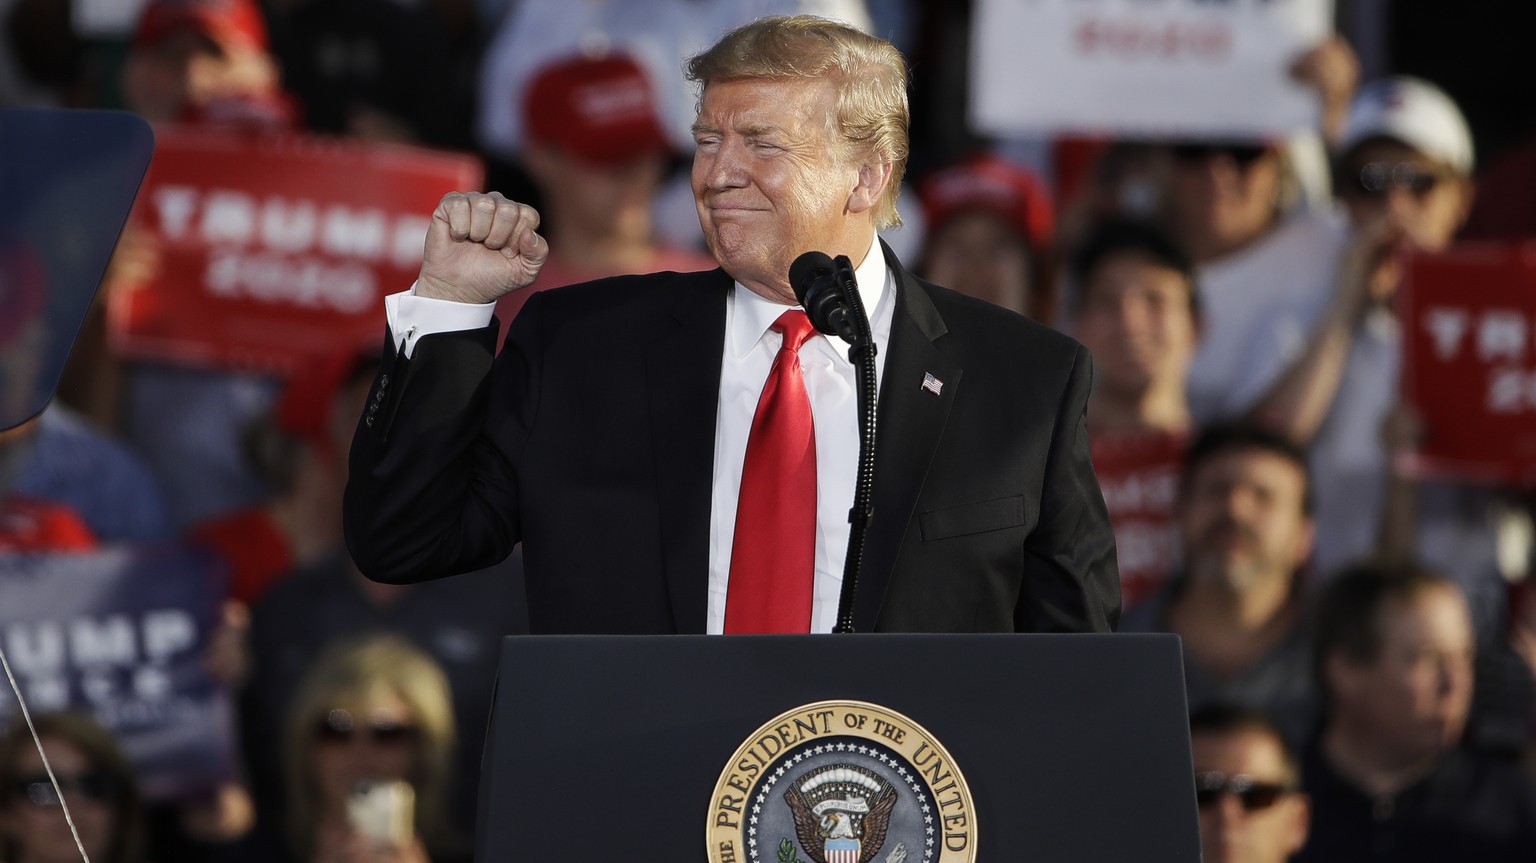 President Donald Trump gestures during a campaign rally in Montoursville, Pa., Monday, May 20, 2019. (AP Photo/Matt Rourke)